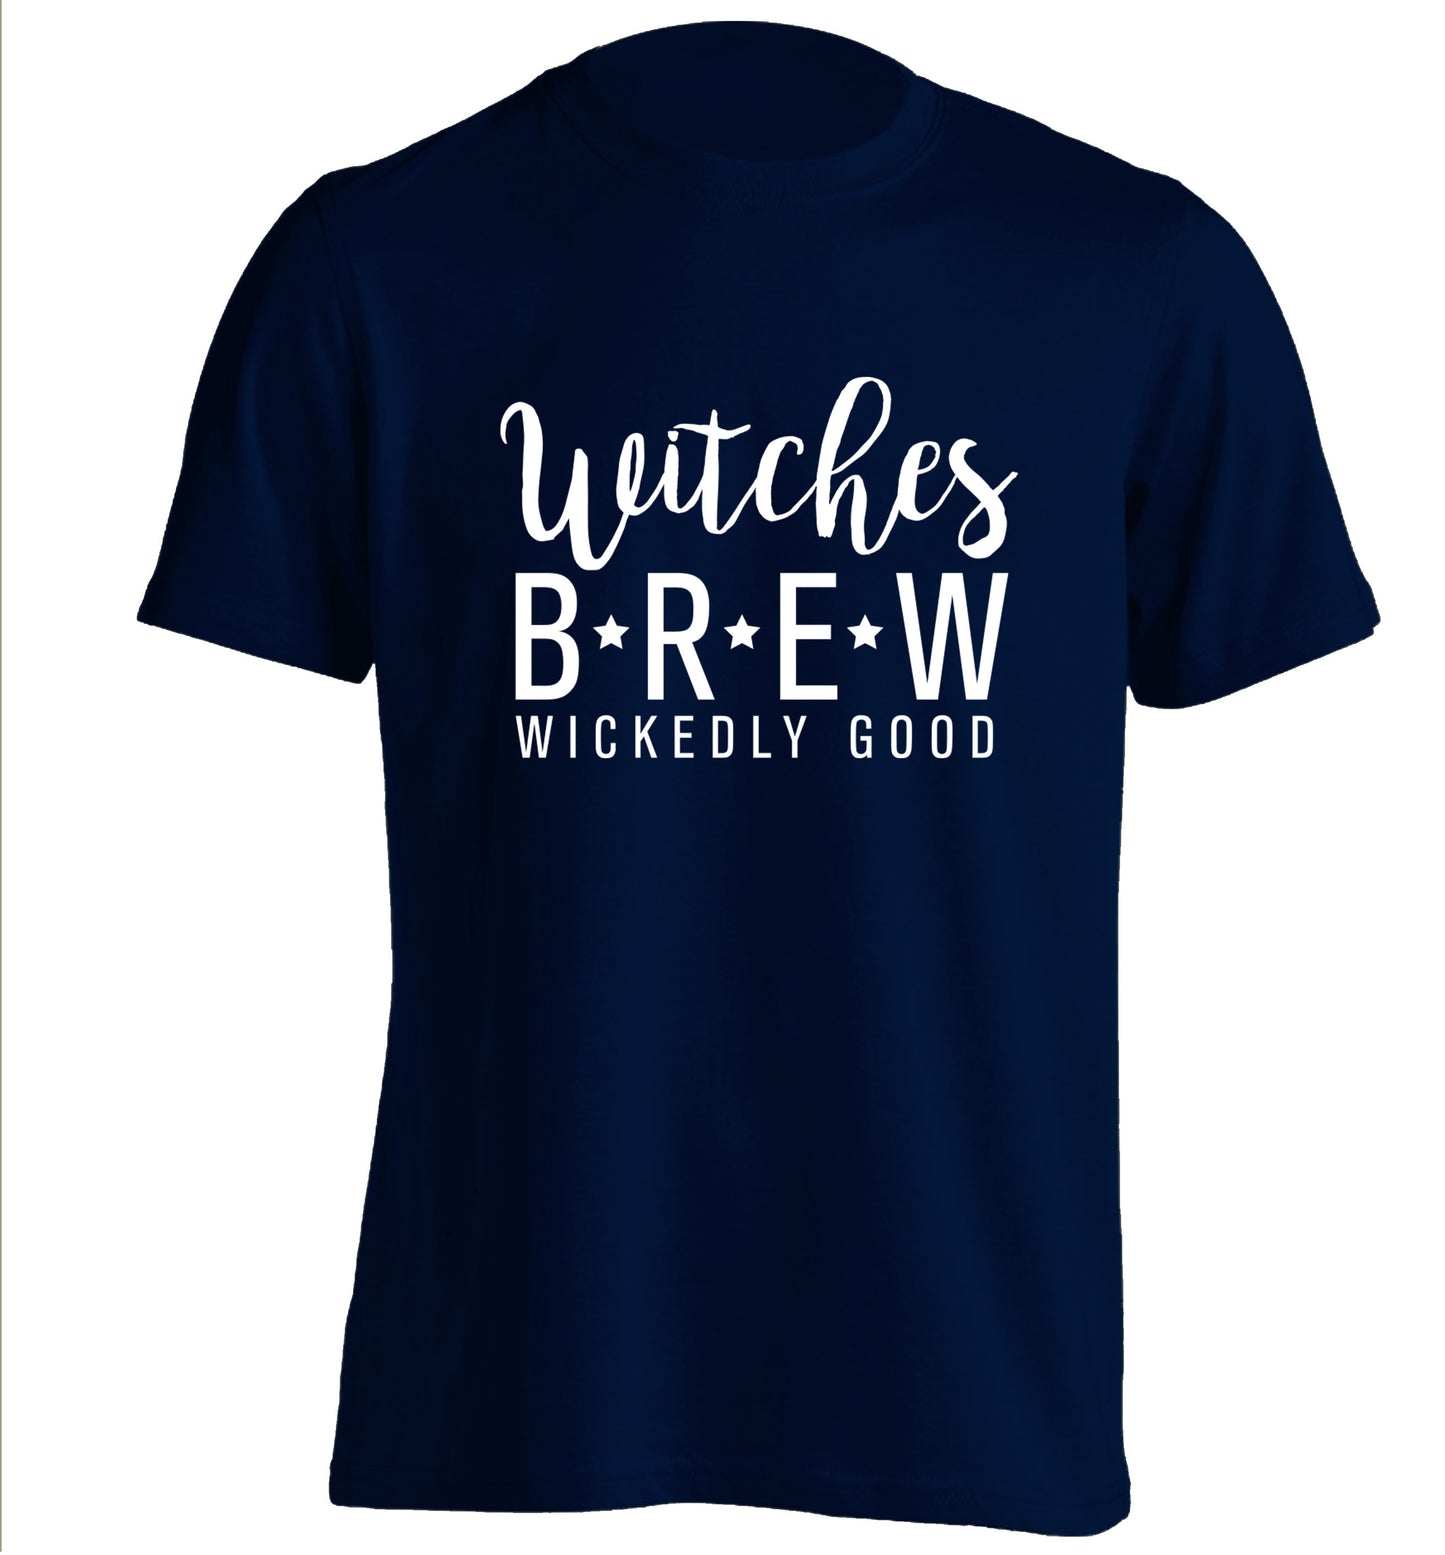 Witches Brew wickedly good adults unisex navy Tshirt 2XL